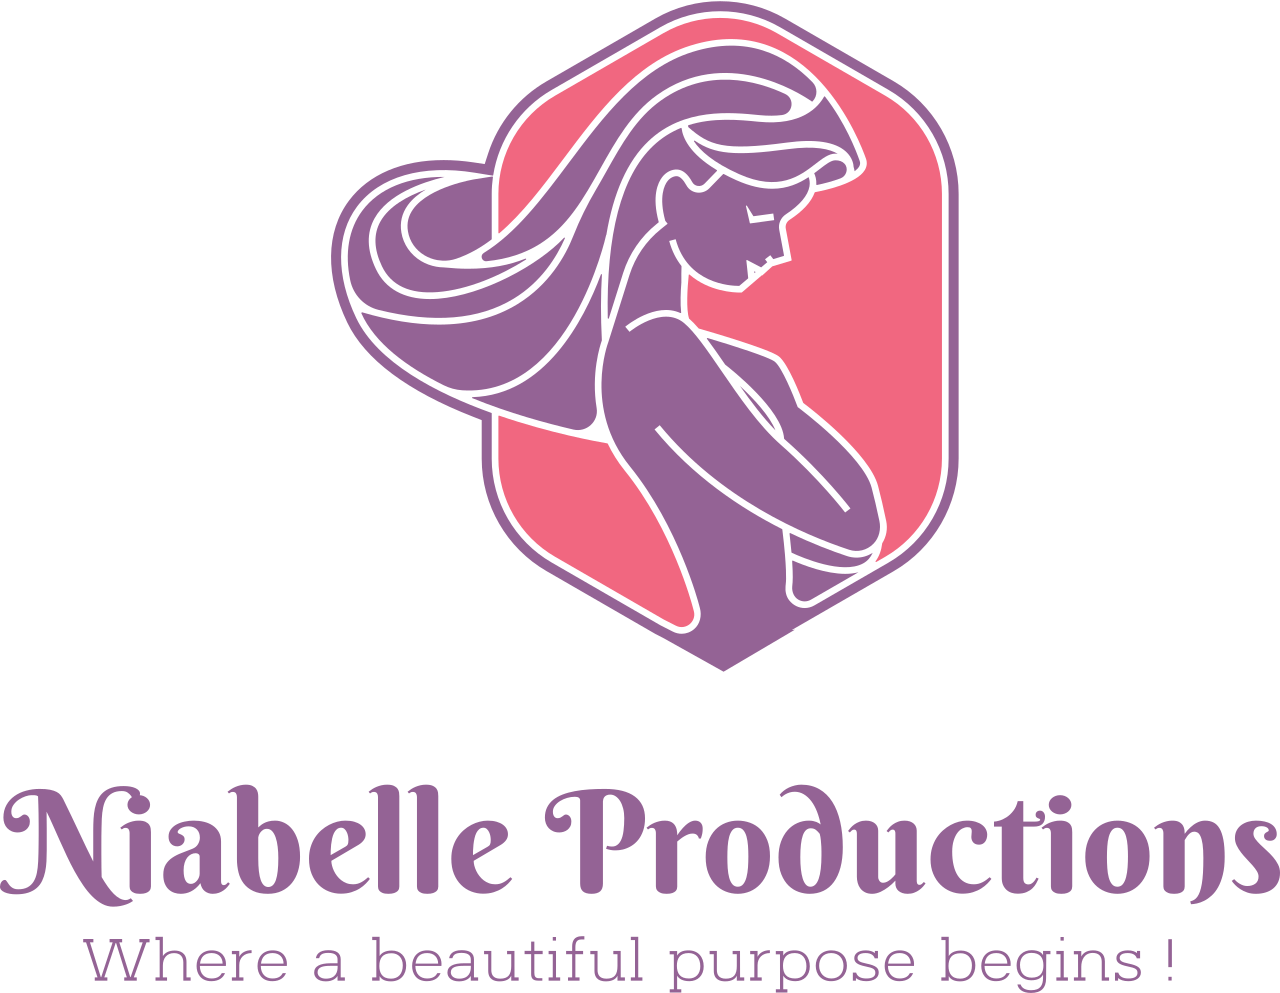 Niabelle Productions's logo